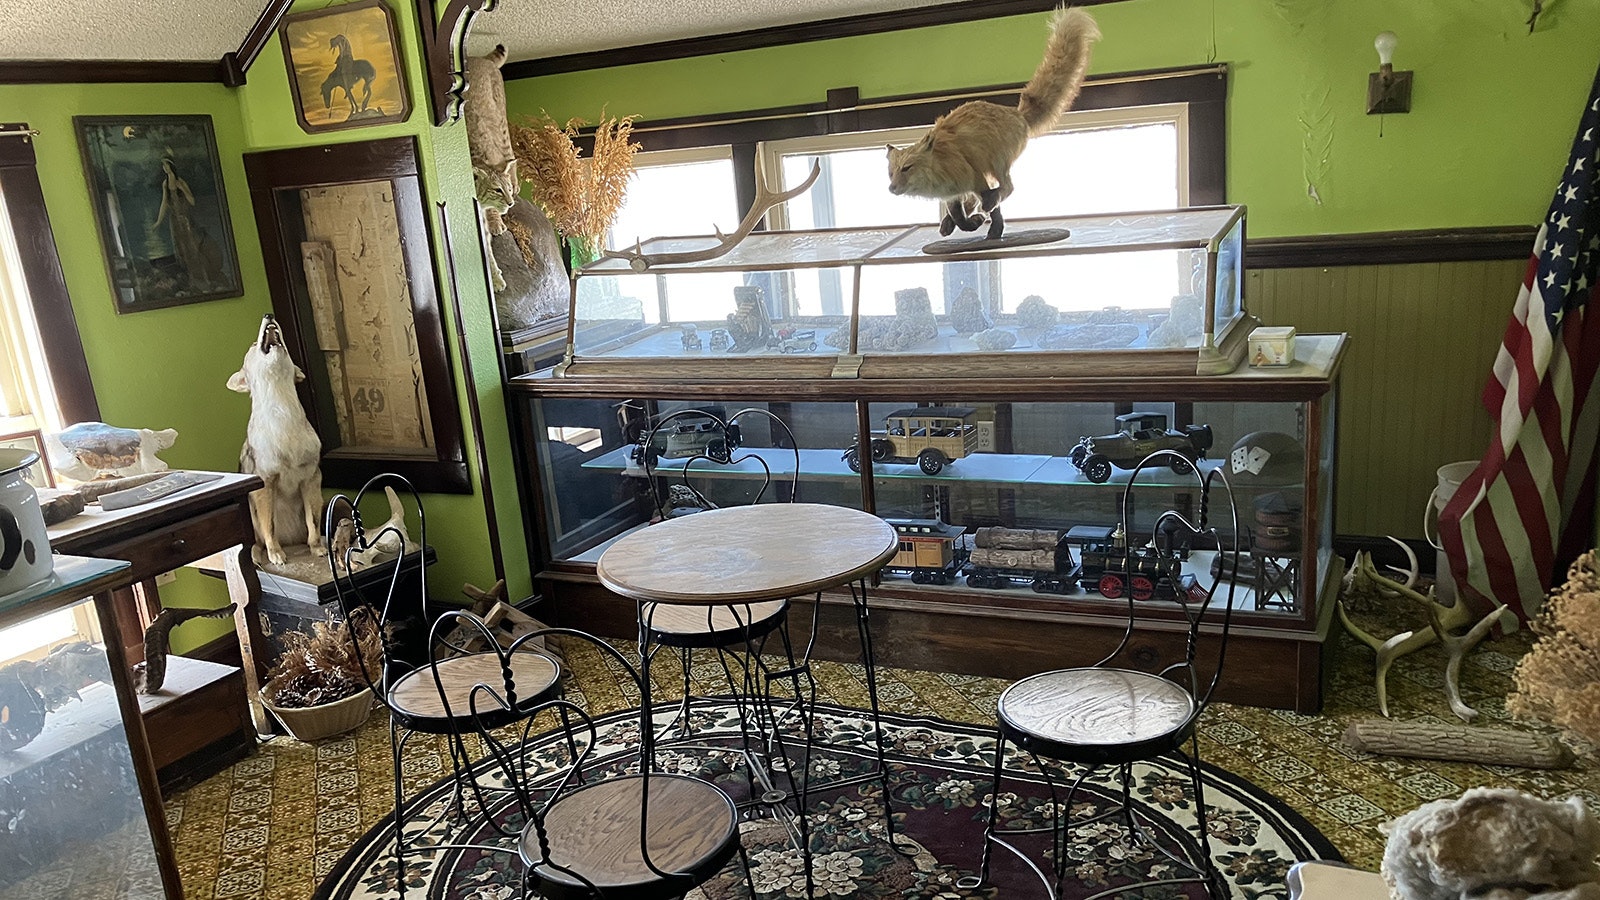 A room at the museum above the  Plains Ice Cream Parlor offers some taxidermized animals as well as a display of model cars and a train.